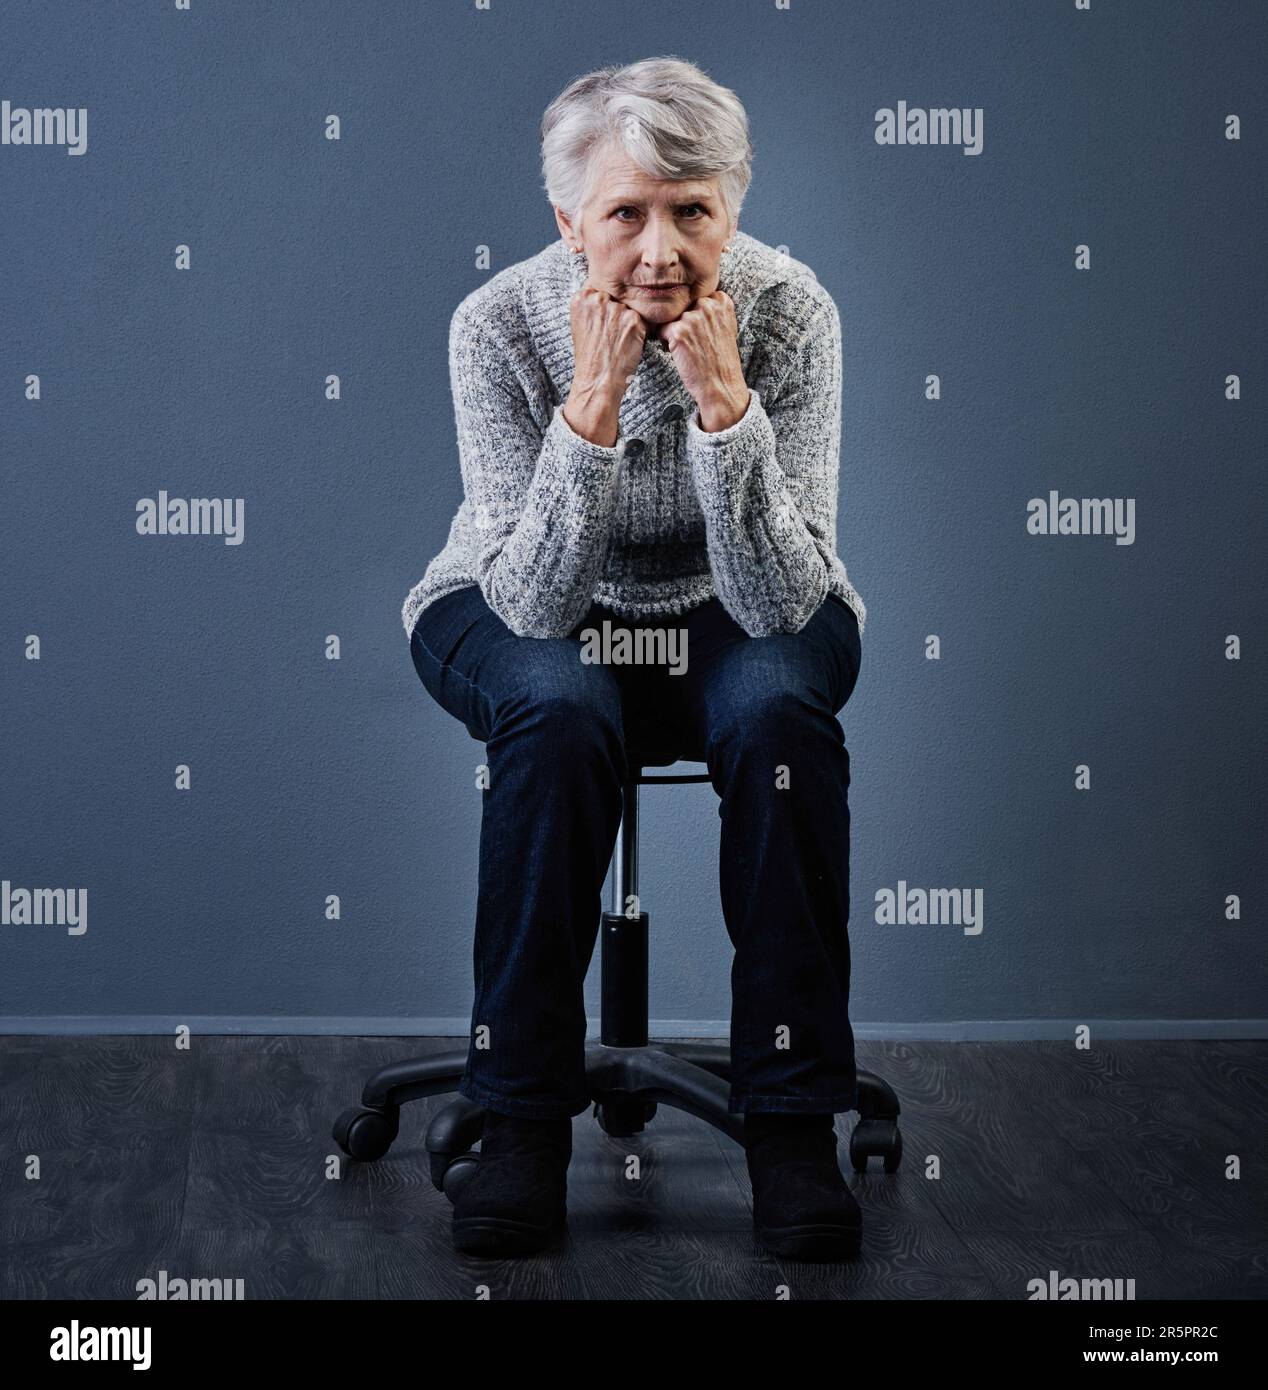 If looks could kill. Studio shot of an elderly woman sitting with her hands under her chin while looking at the camera. Stock Photo